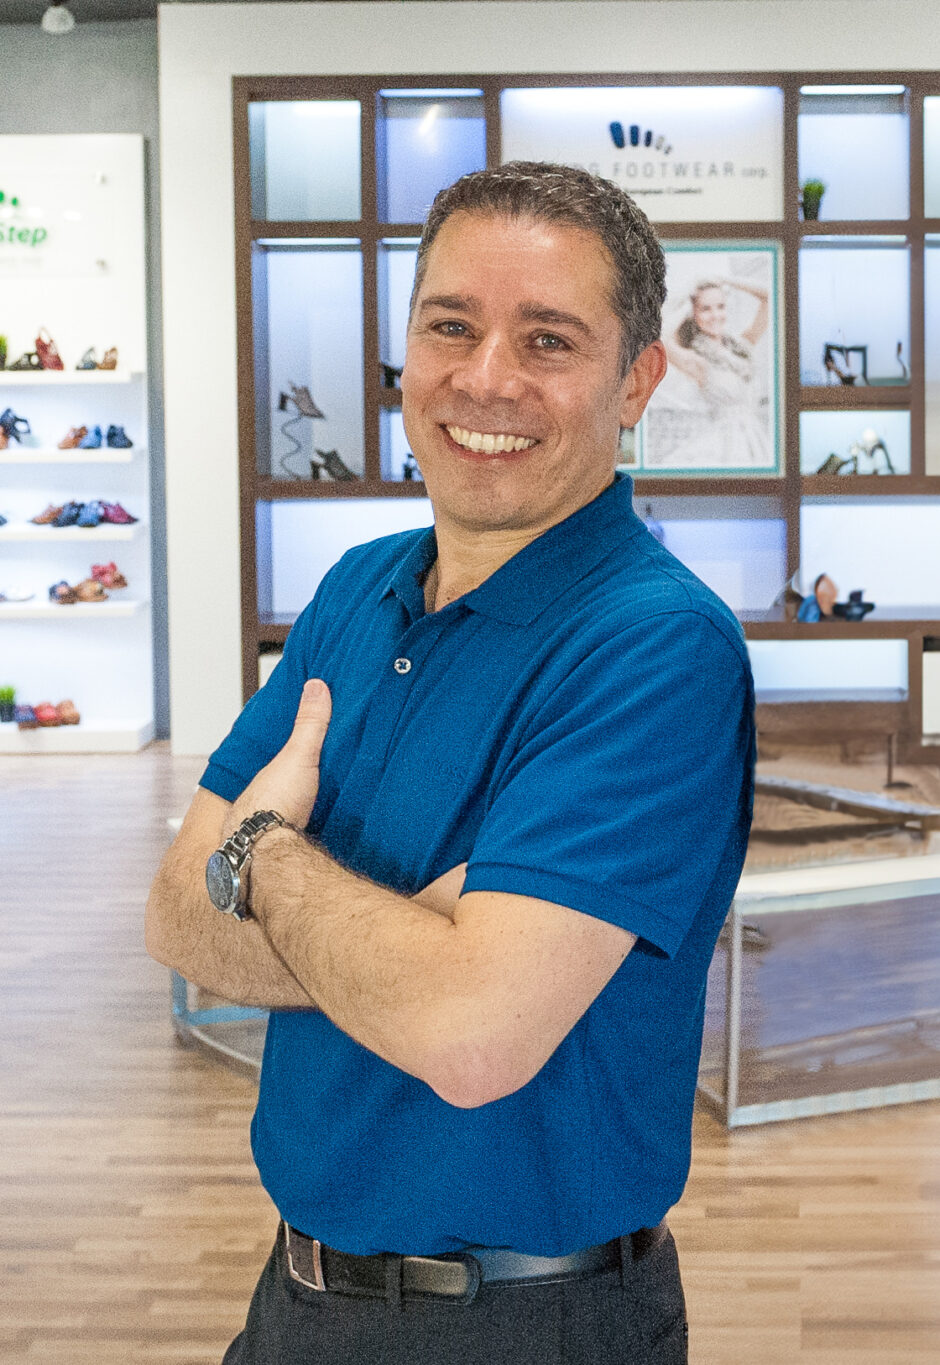 David Ben Zikry, CEO and cofounder of Spring Footwear Corporation